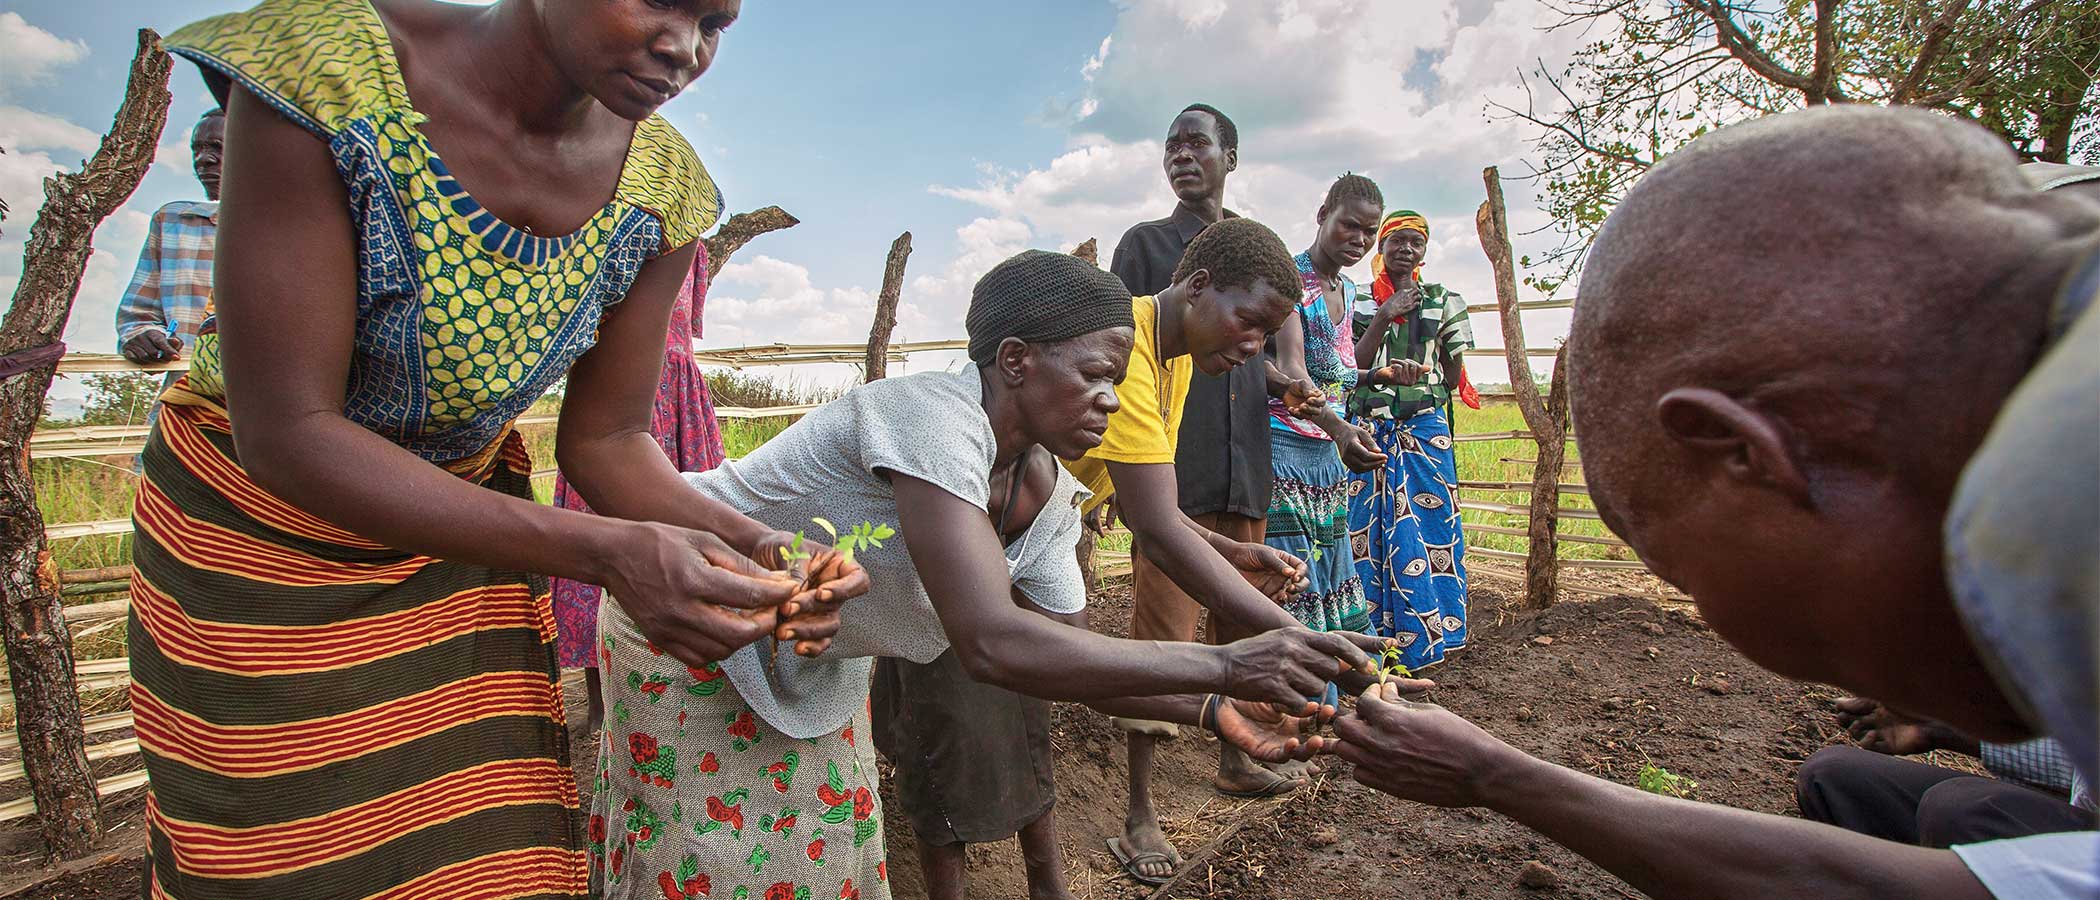 In the Gulu District of Uganda villagers learn permagardening, sponsored by CAFWA, Community Action Fund for Women in Africa, which integrates water-saving practices, soil fertility, companion-planting knowledge, and enriched raised beds.